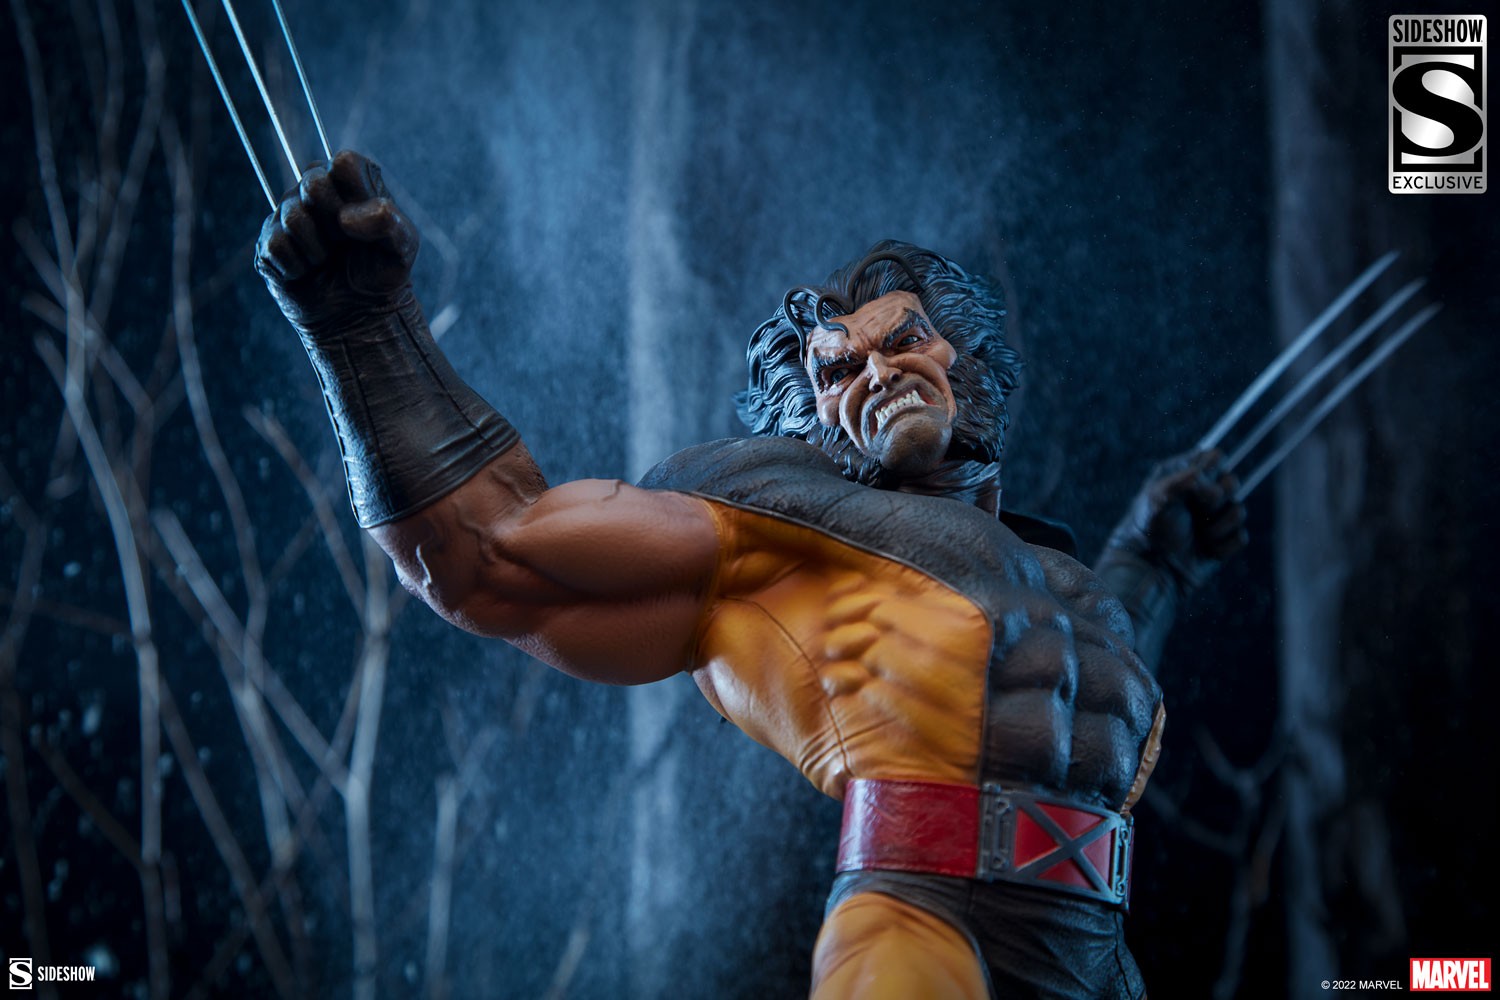 Wolverine Exclusive Edition View 7